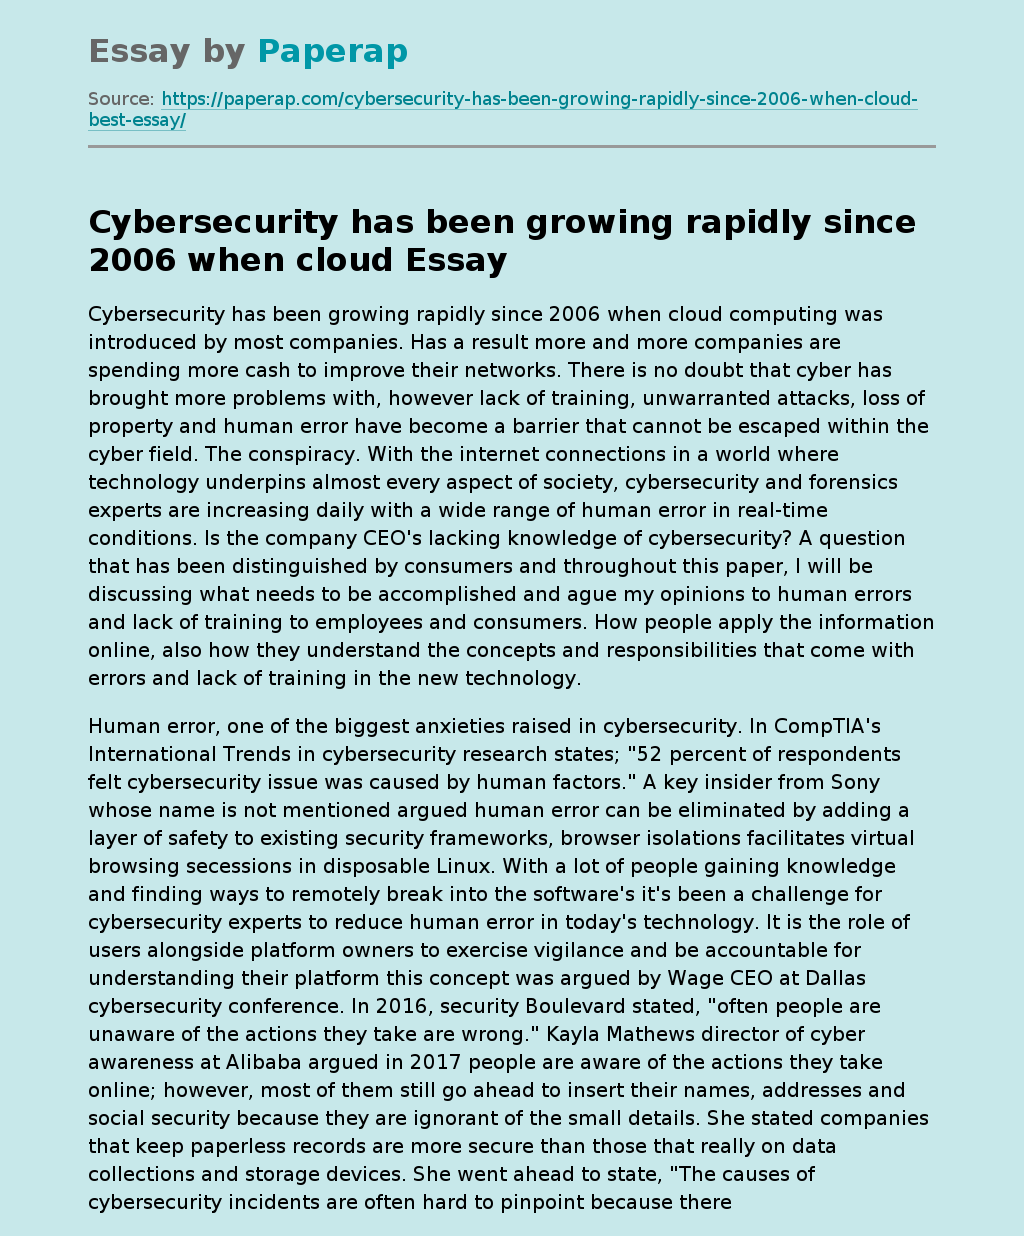 Cybersecurity has been growing rapidly since 2006 when cloud